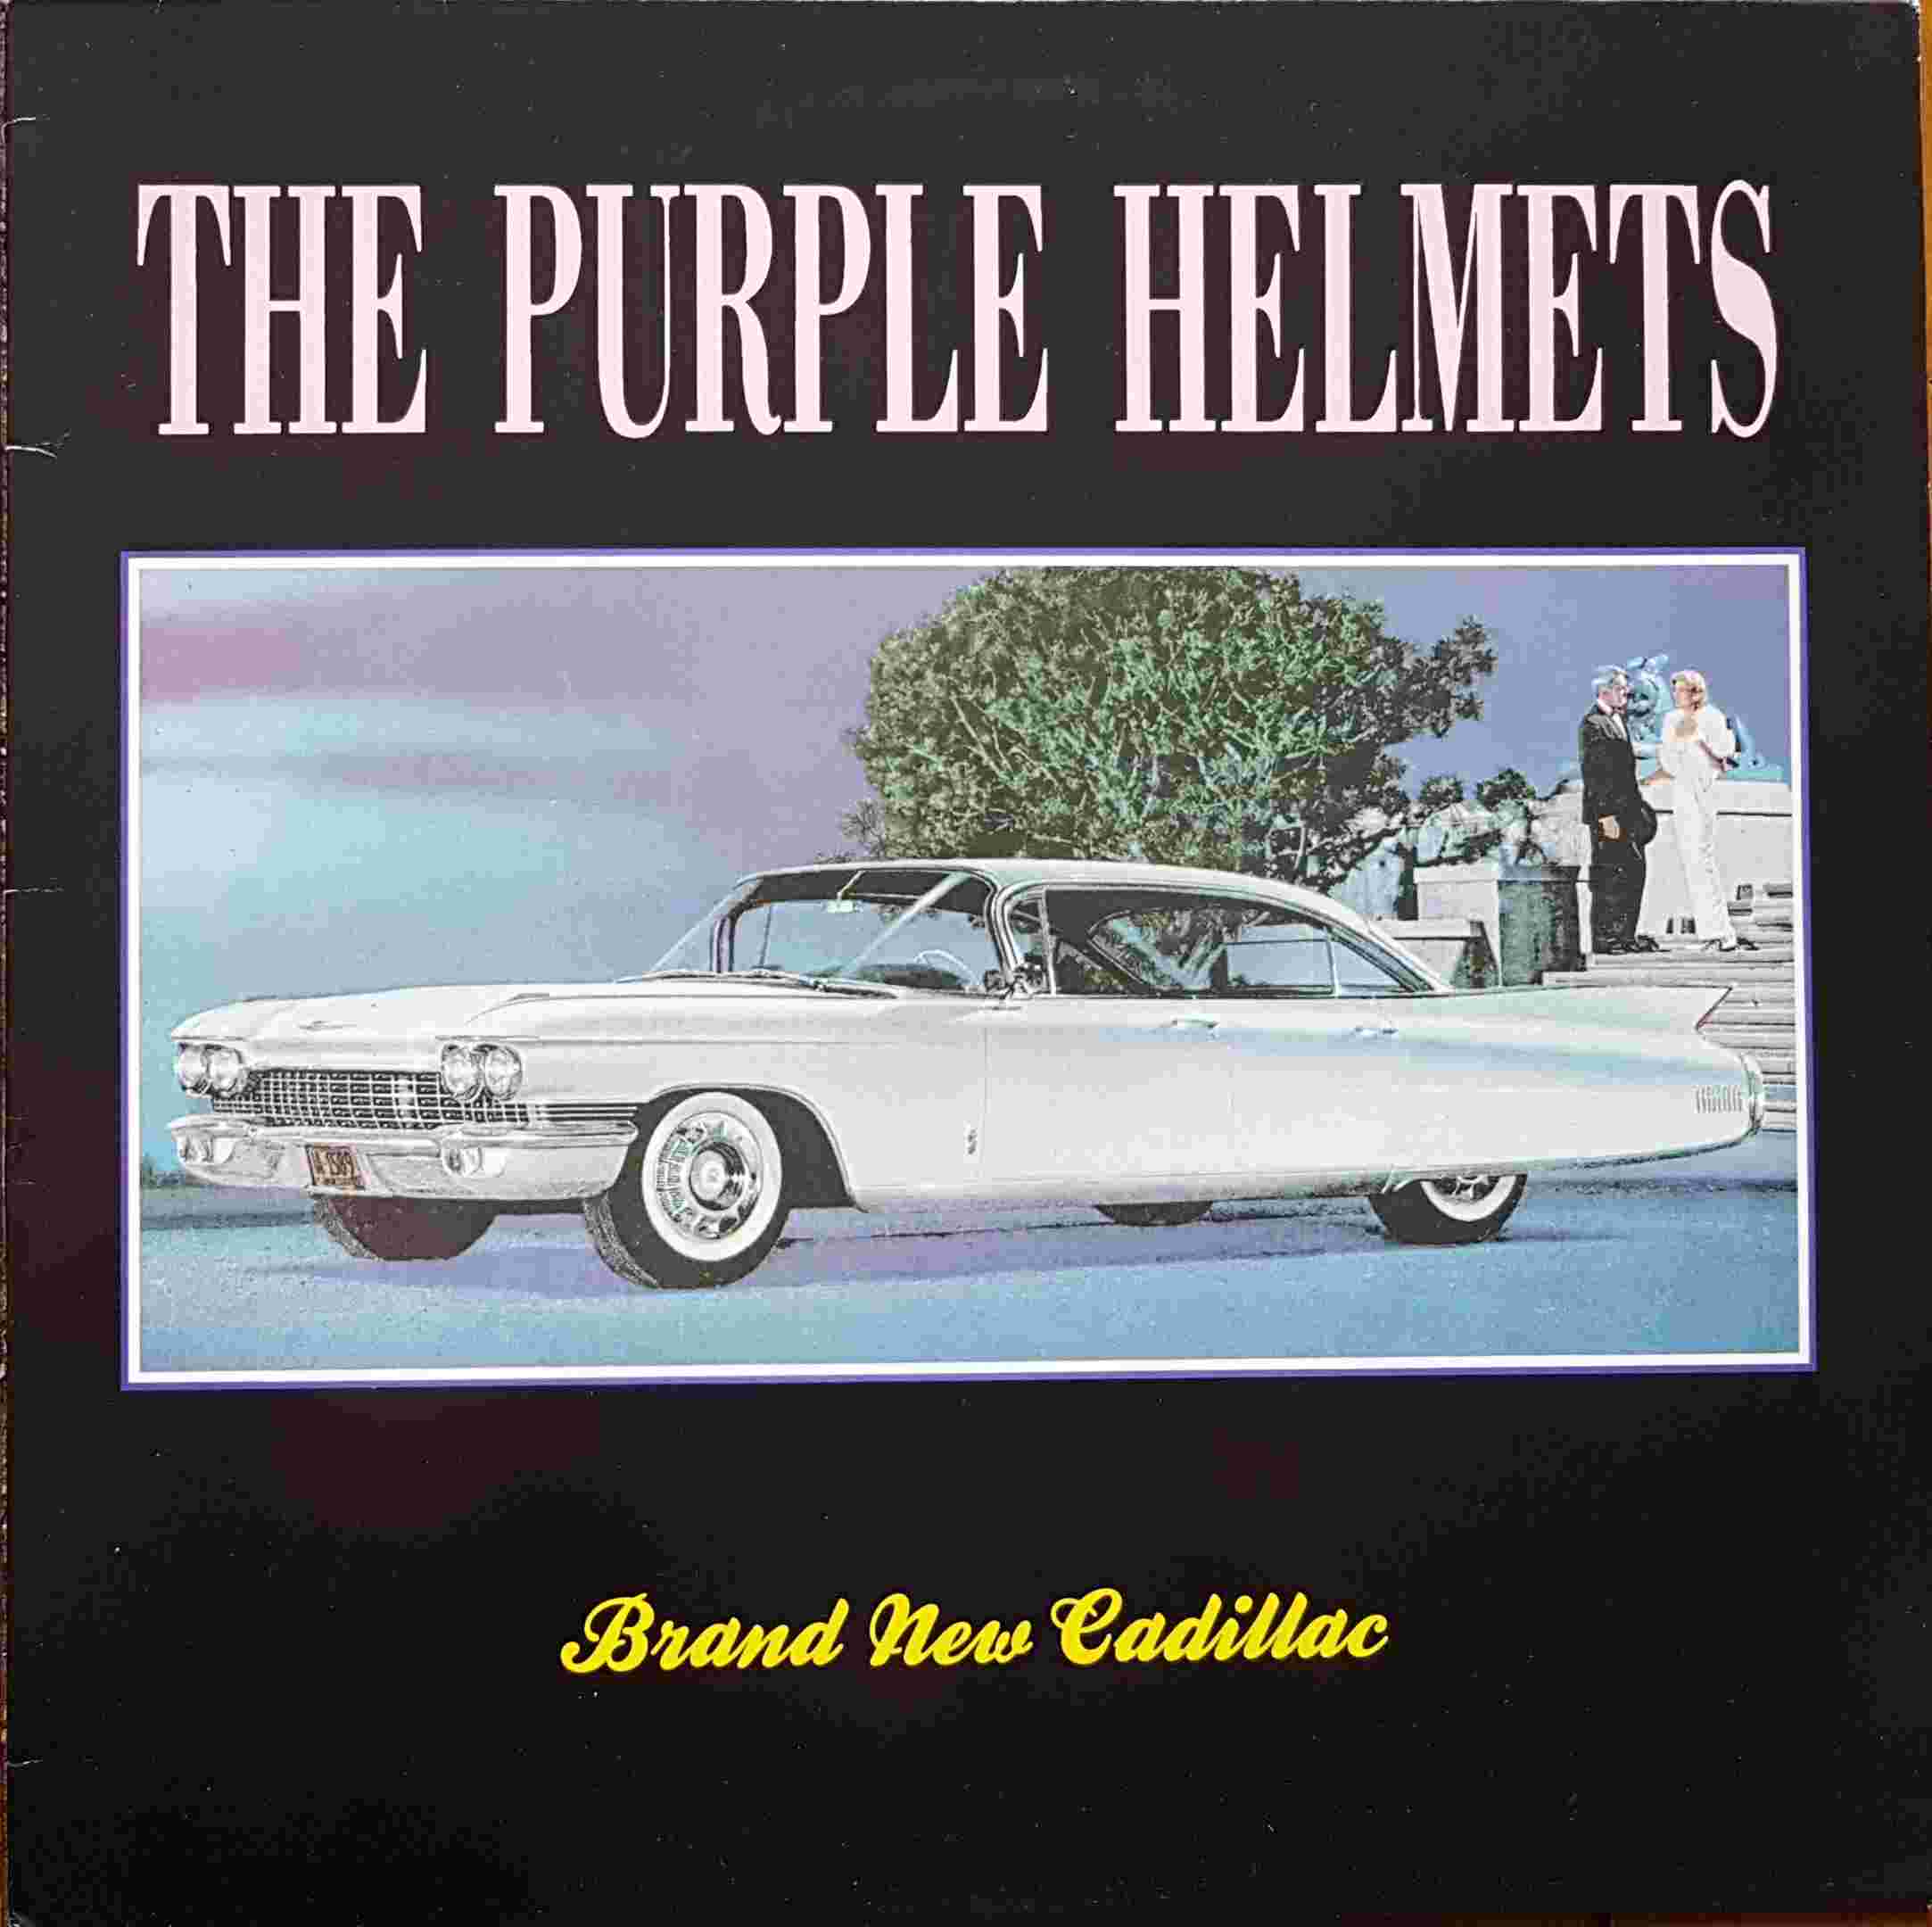 Picture of 12 ANA 50 Brand new Cadillac by artist The Purple Helmets from The Stranglers 12inches